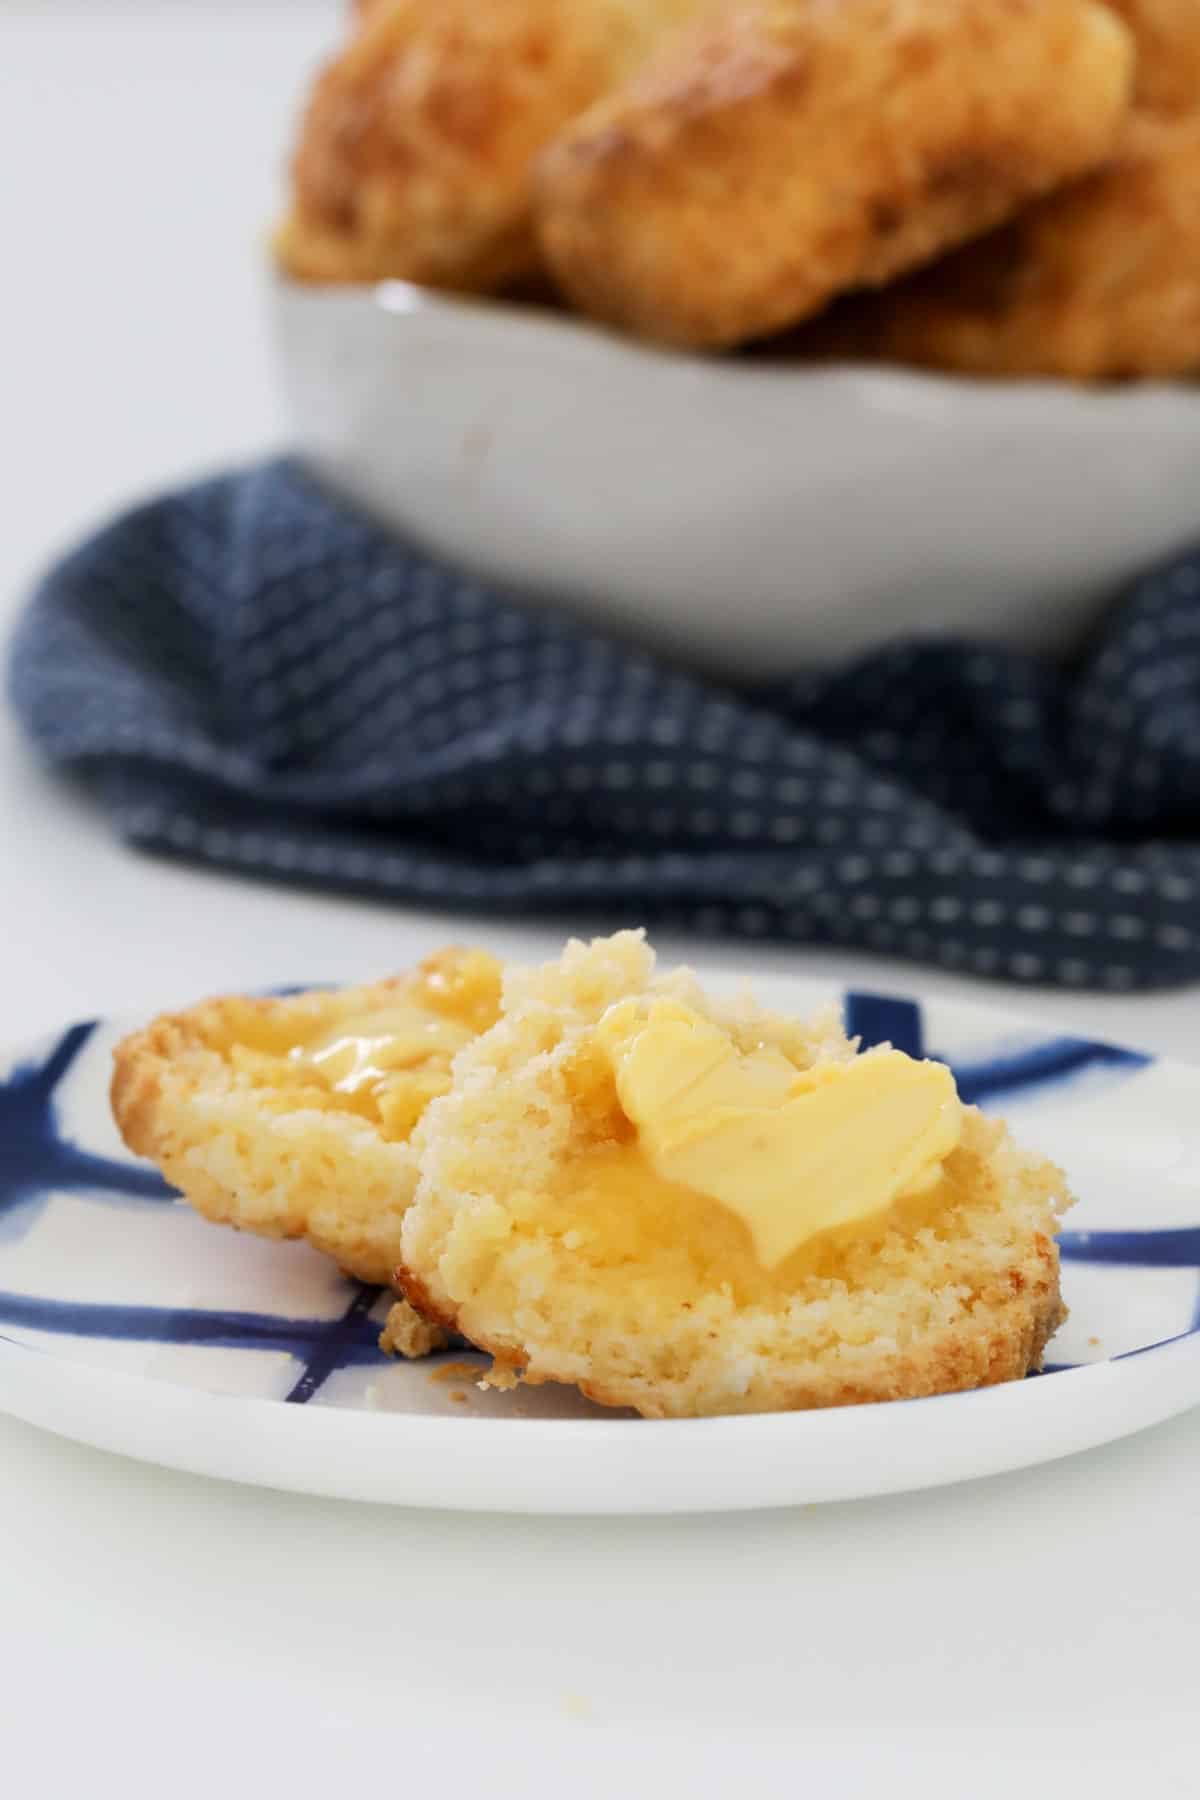 A gluten free cheese scone split and buttered, and served on a plate.